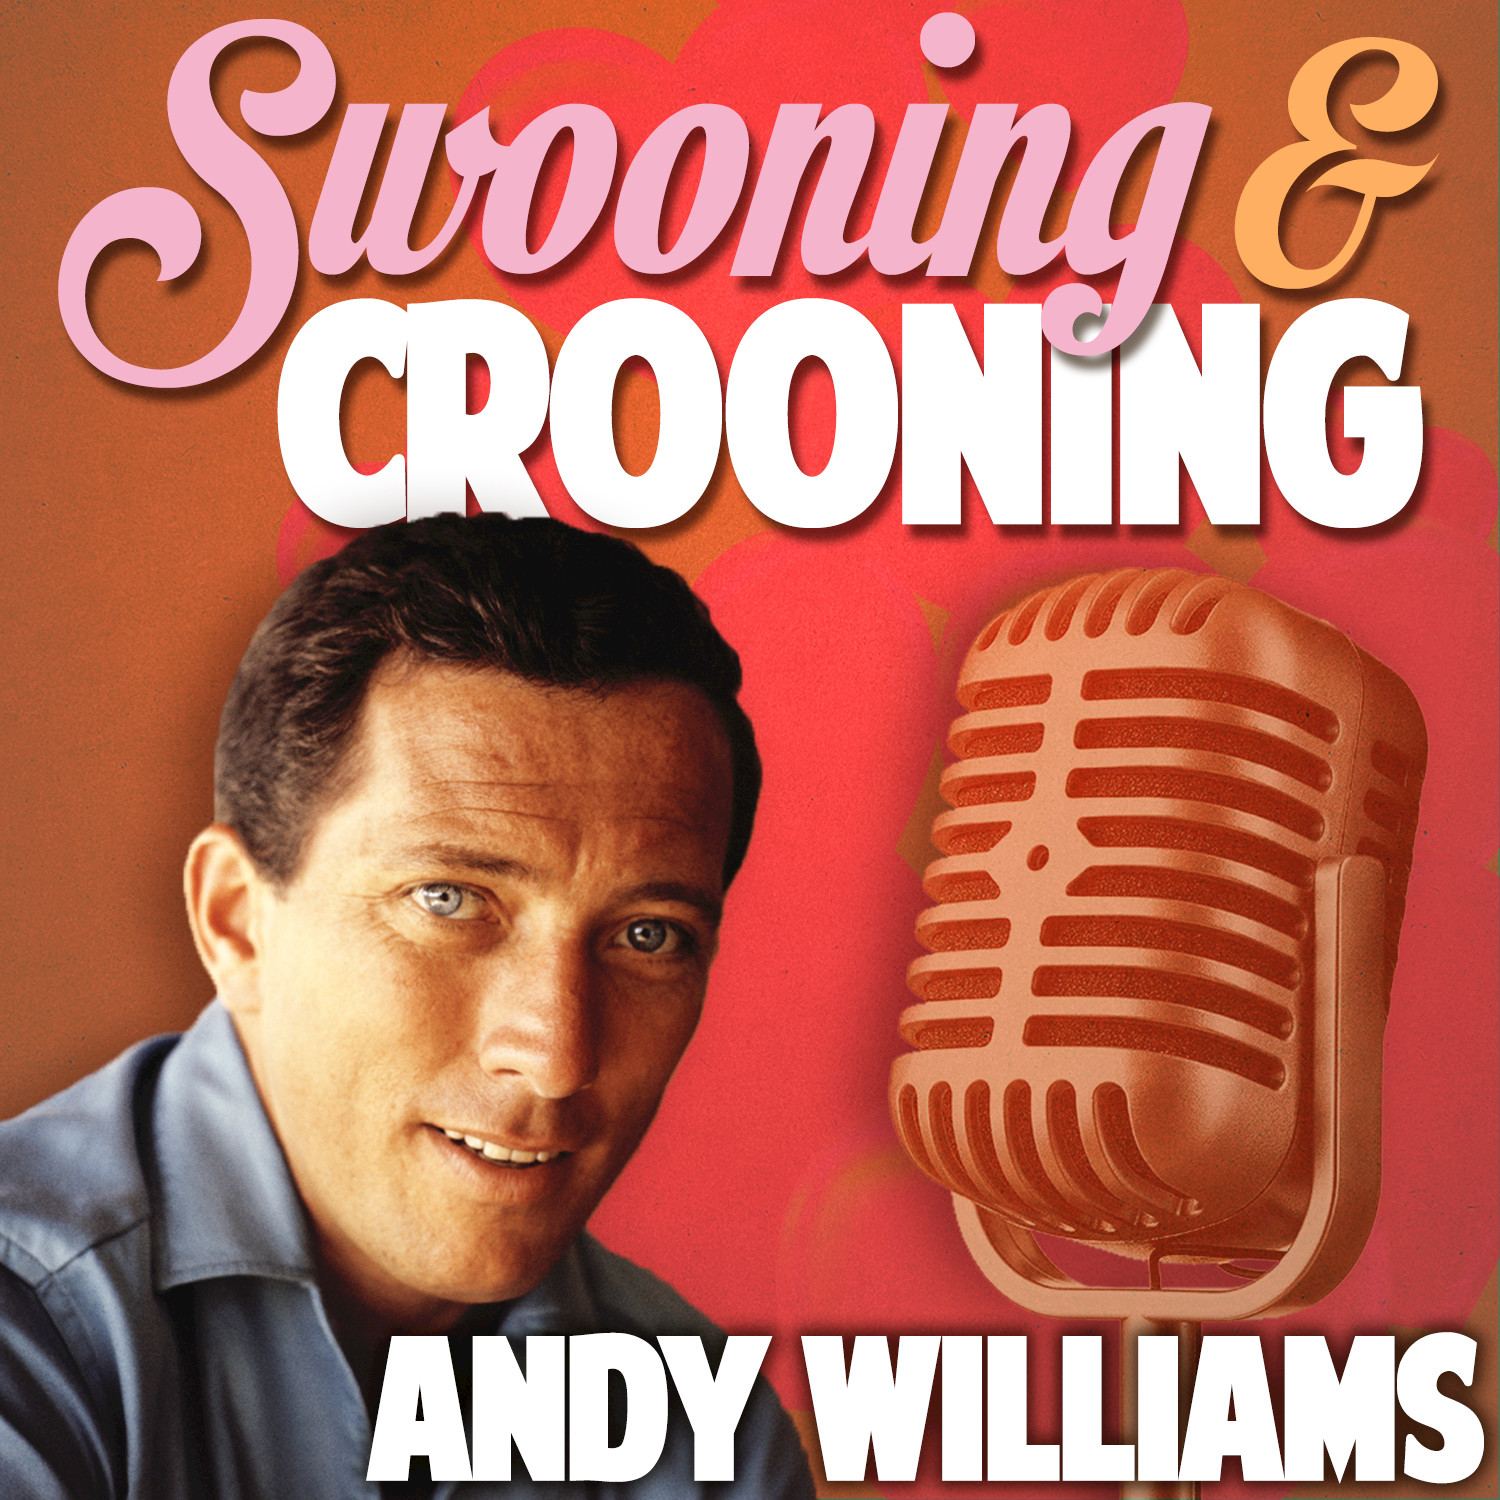 Swooning and Crooning - Andy Williams